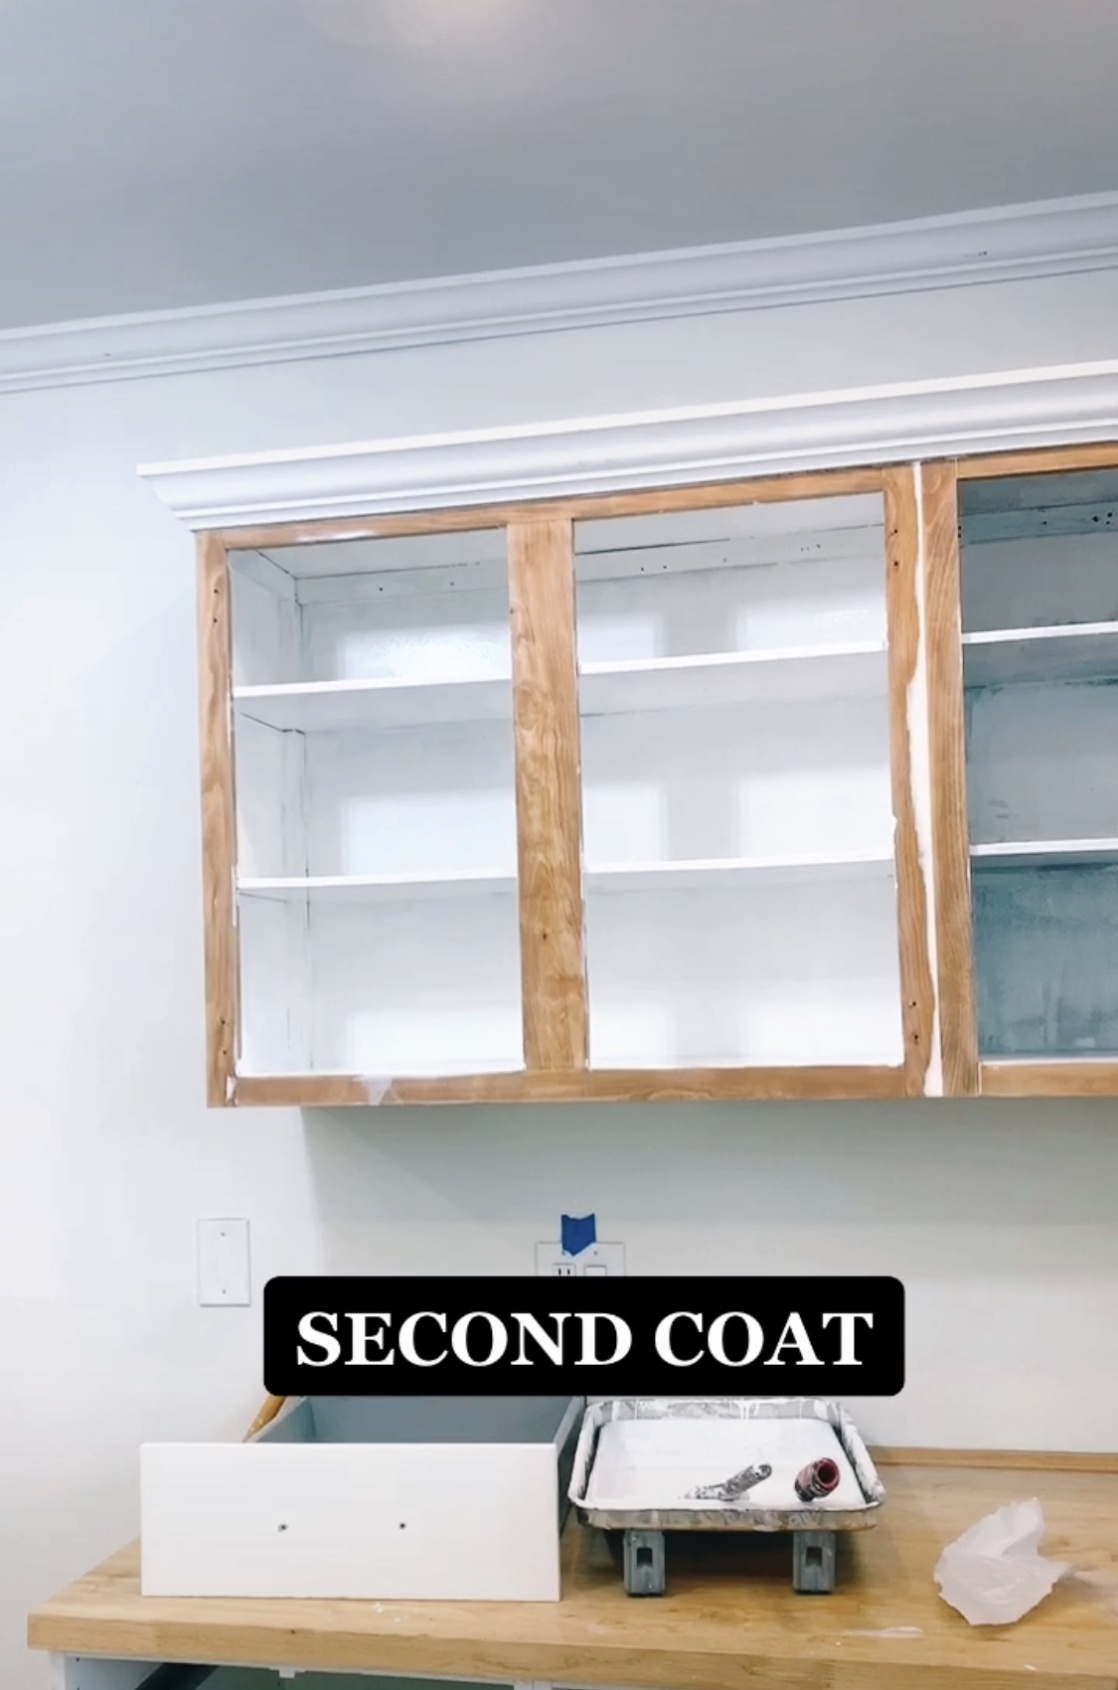 How To Paint Wooden Kitchen Cabinets - Step by Step Guide - Step 4 Painting Second Coat Kitchen Photos #diy #cabinets #Kitchen #painting #kitchencabinets #paintingkitchen #benjaminmoore #beforephotos #home #diyhome #homeproject #westchestercounty #newyork Simone Piliero - Simply by Simone